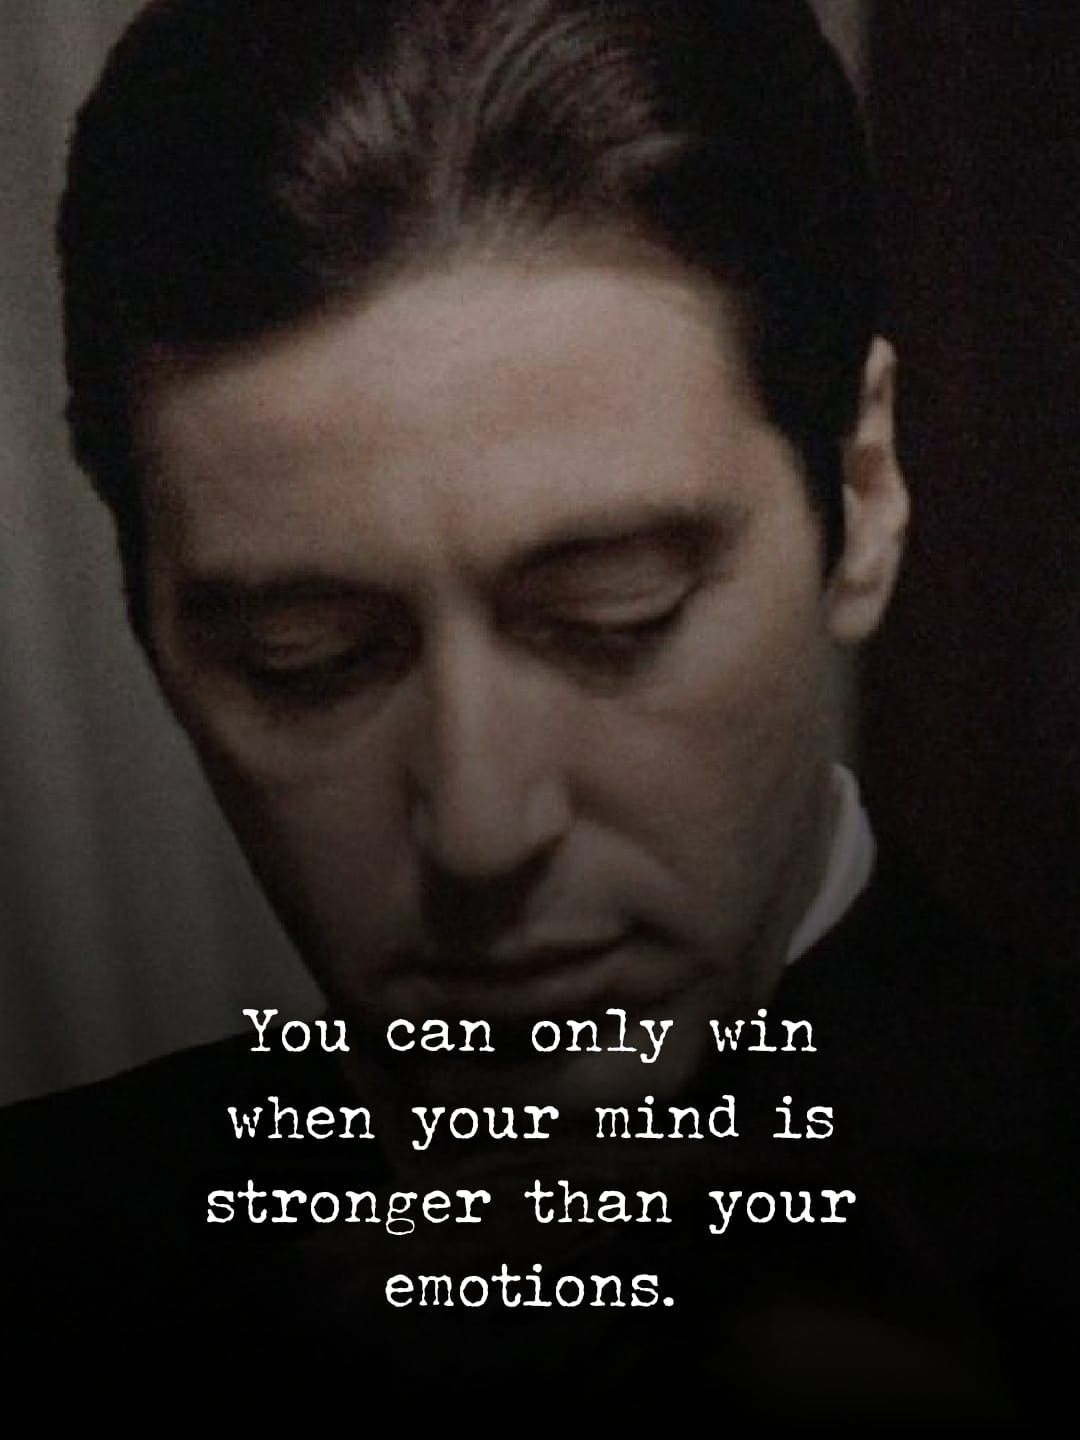 You can only win when your mind is stronger than your emotions. – Brian Weiner